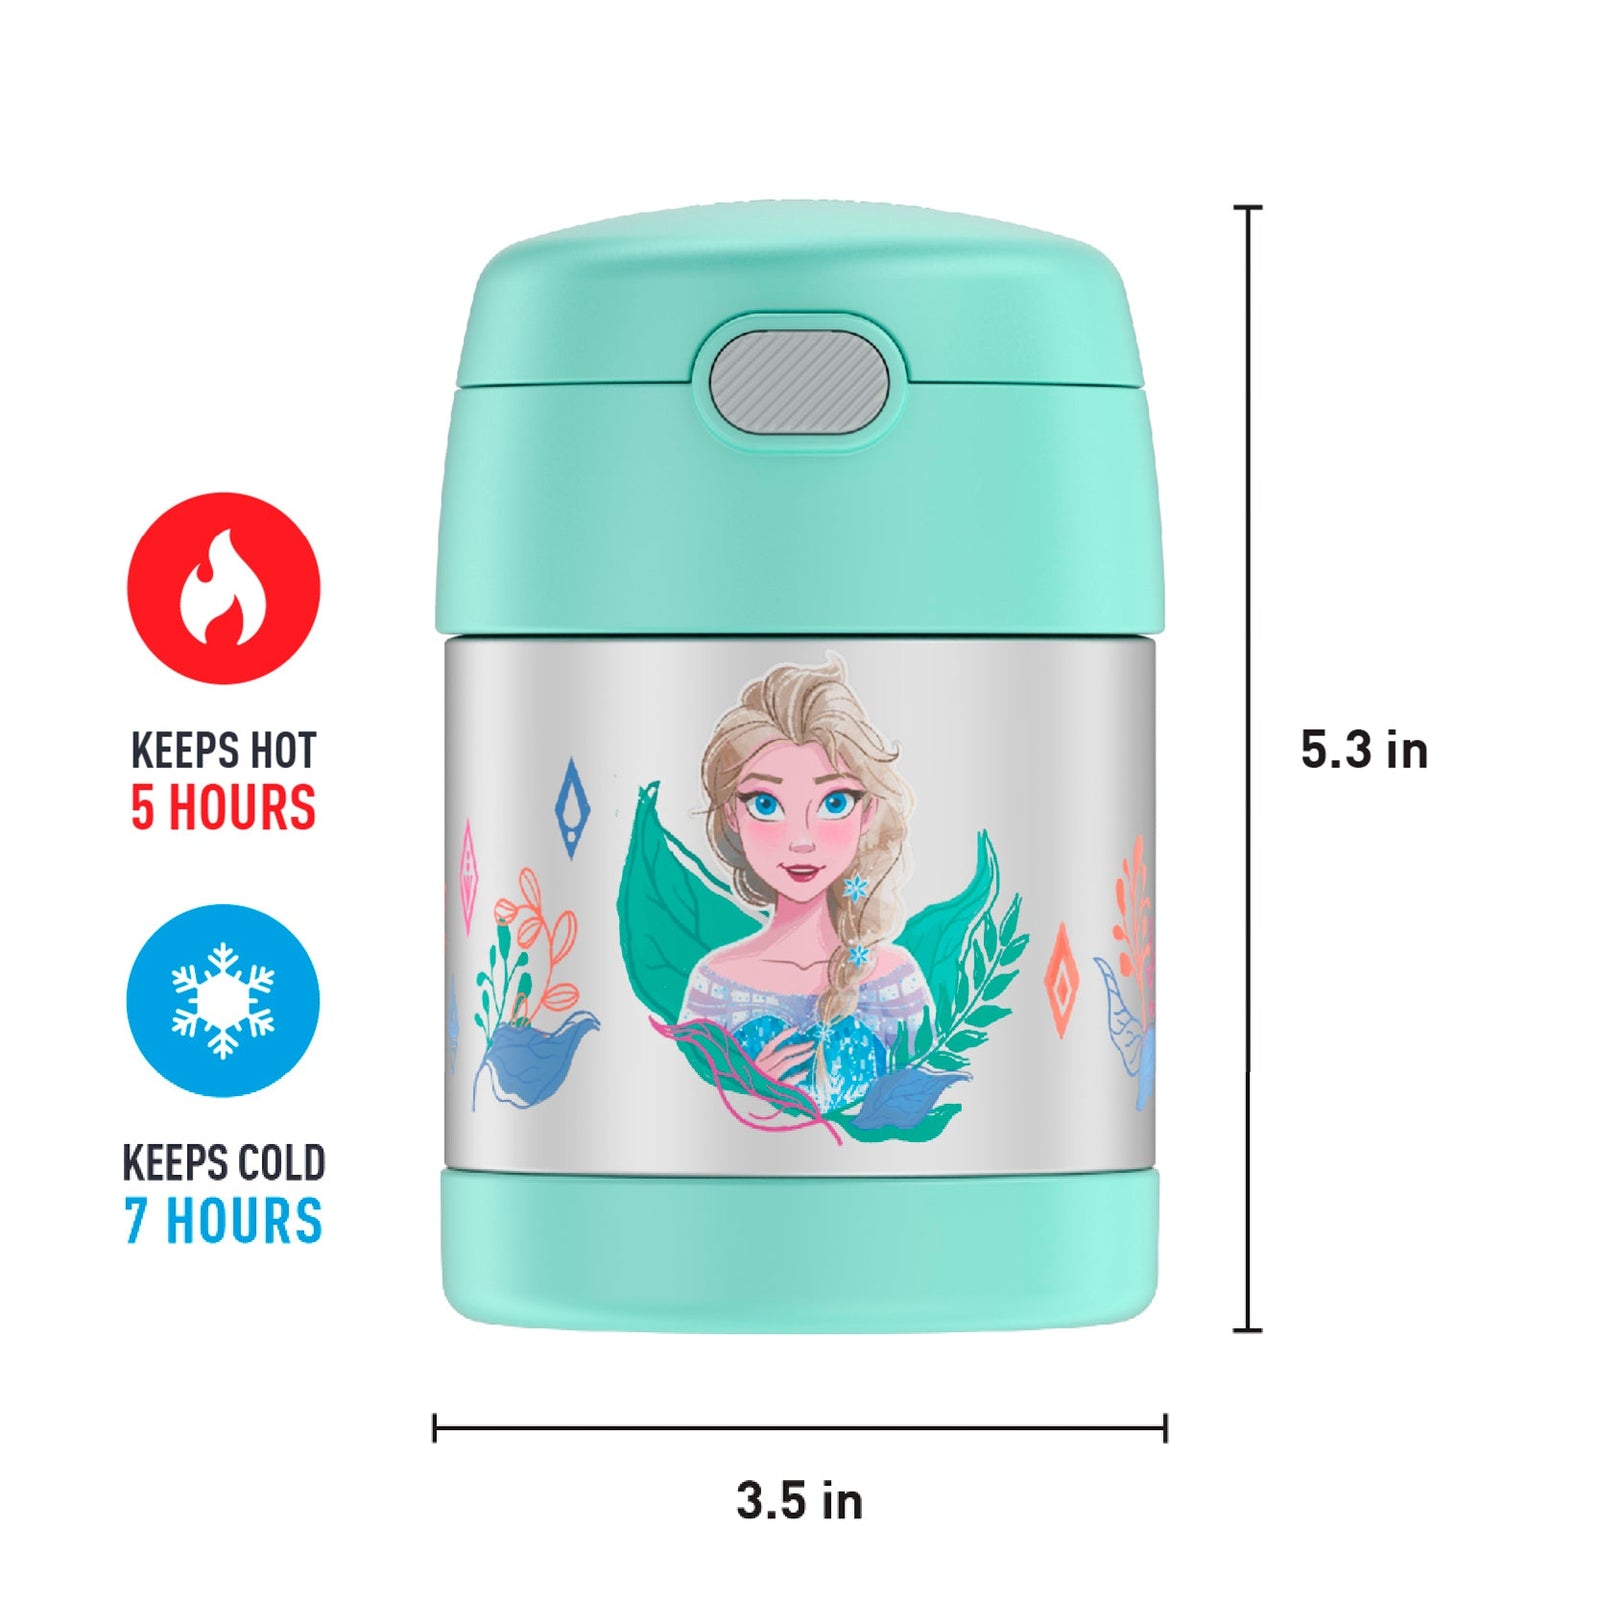 https://cdn.shopify.com/s/files/1/0523/9145/files/thermos-10oz-funtainer-food-jar-with-spoon-frozen-2-mint-thermal-food-jar-thermos-cute-kid-stuff-1_1600x.jpg?v=1682542558